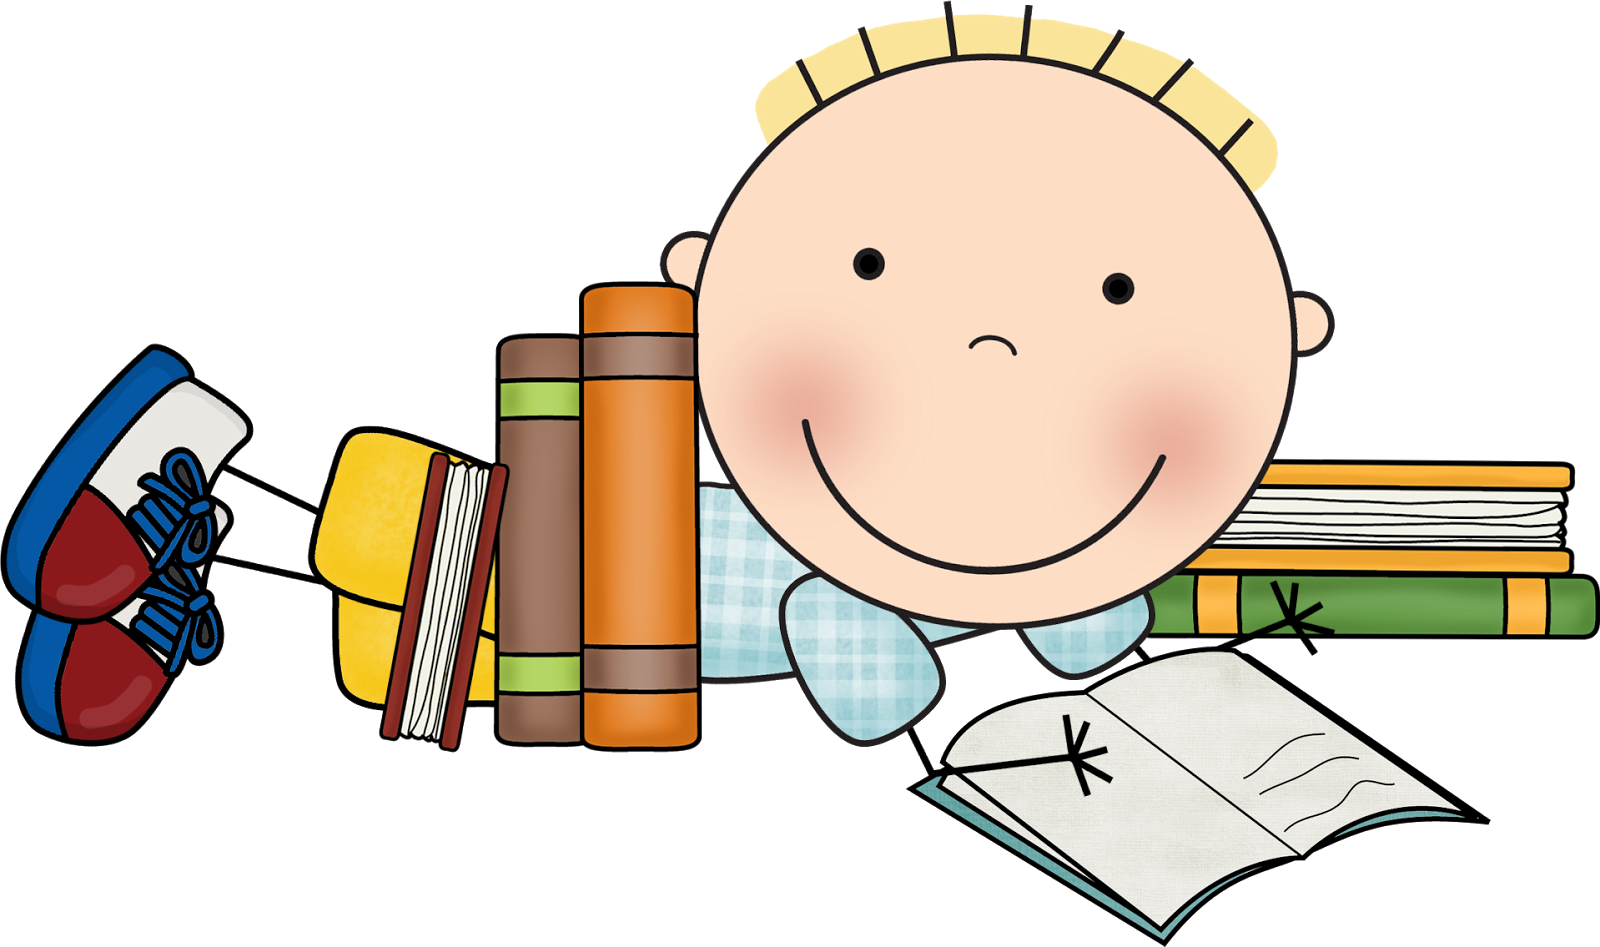 clipart library download - photo #34